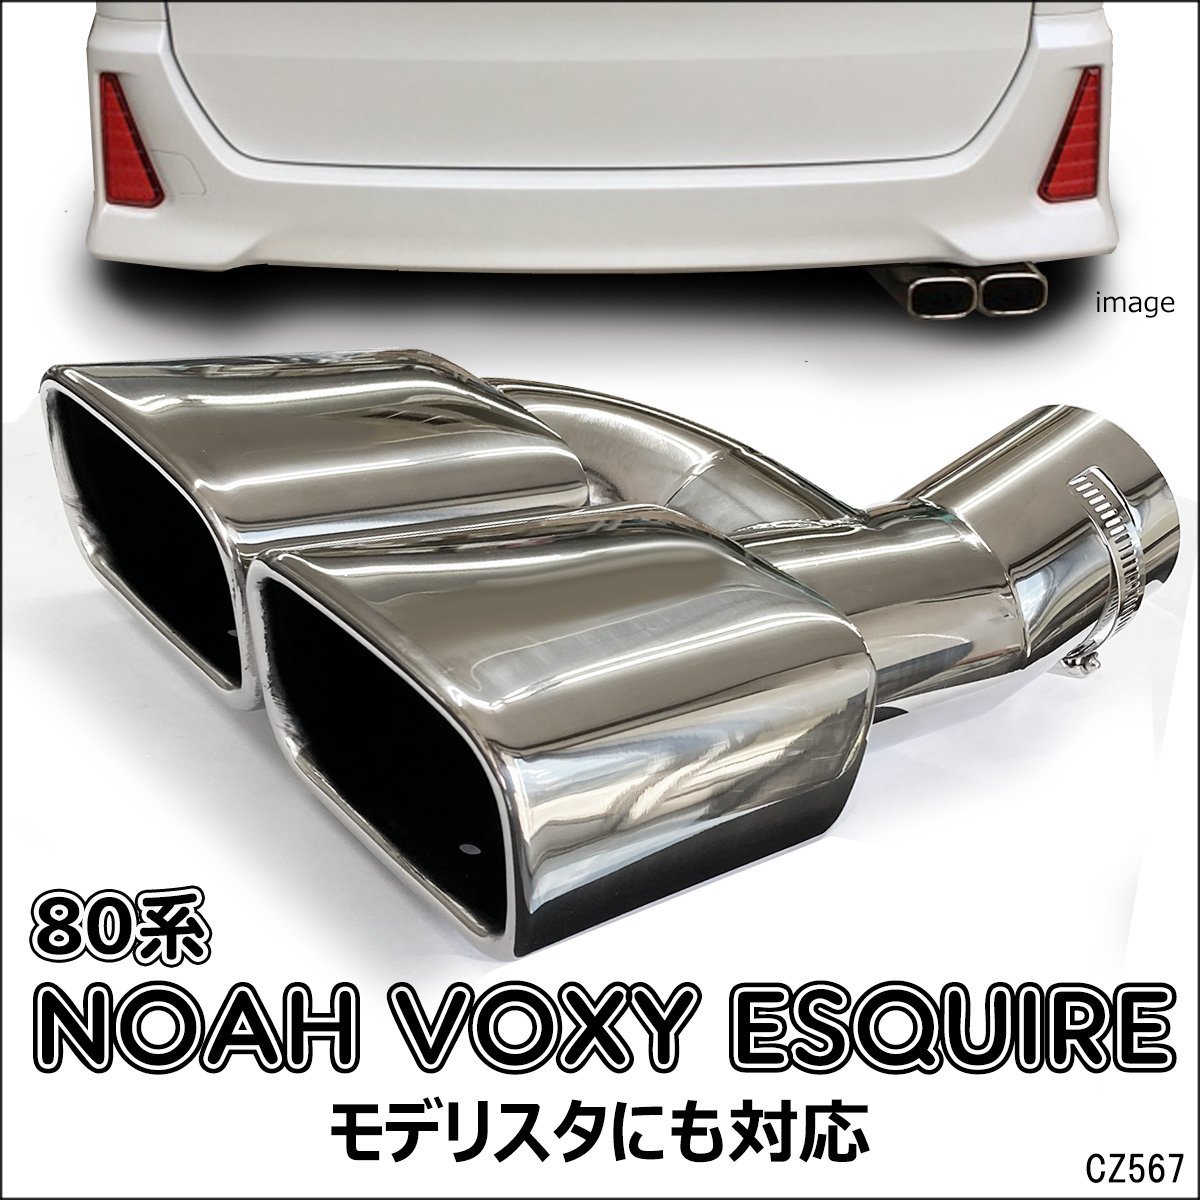  Toyota 80 series Noah Voxy Esquire exclusive use Modellista correspondence muffler cutter 2 pipe out square /22К